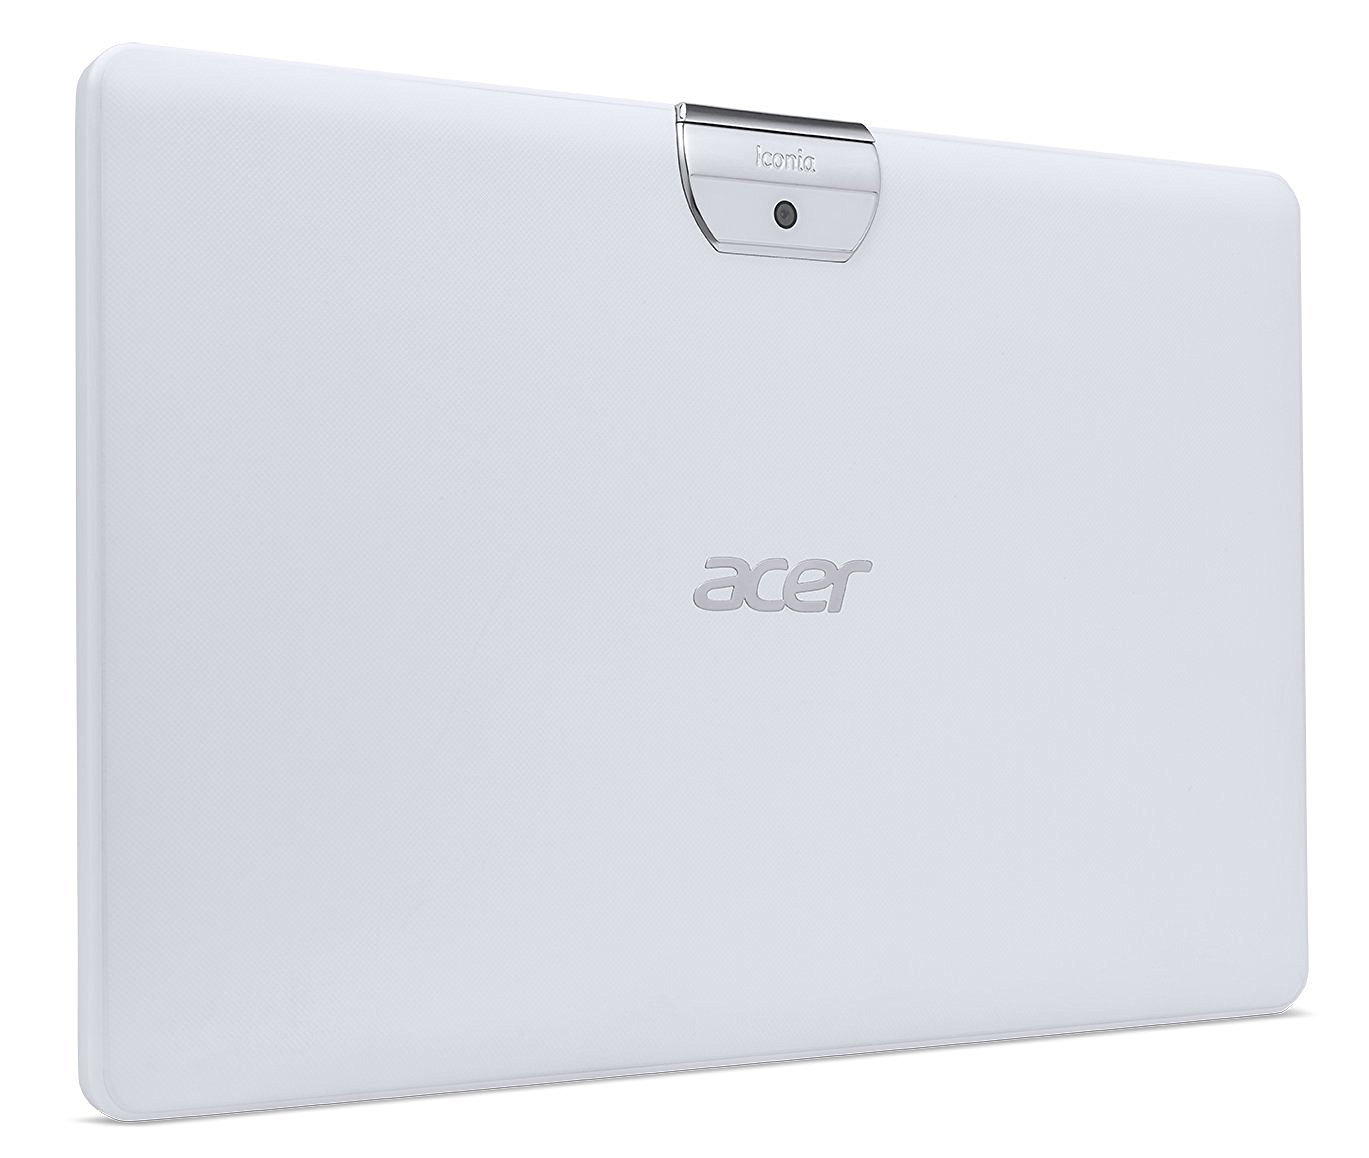 Acer Iconia One 10 B3-A30 cubierta trasera